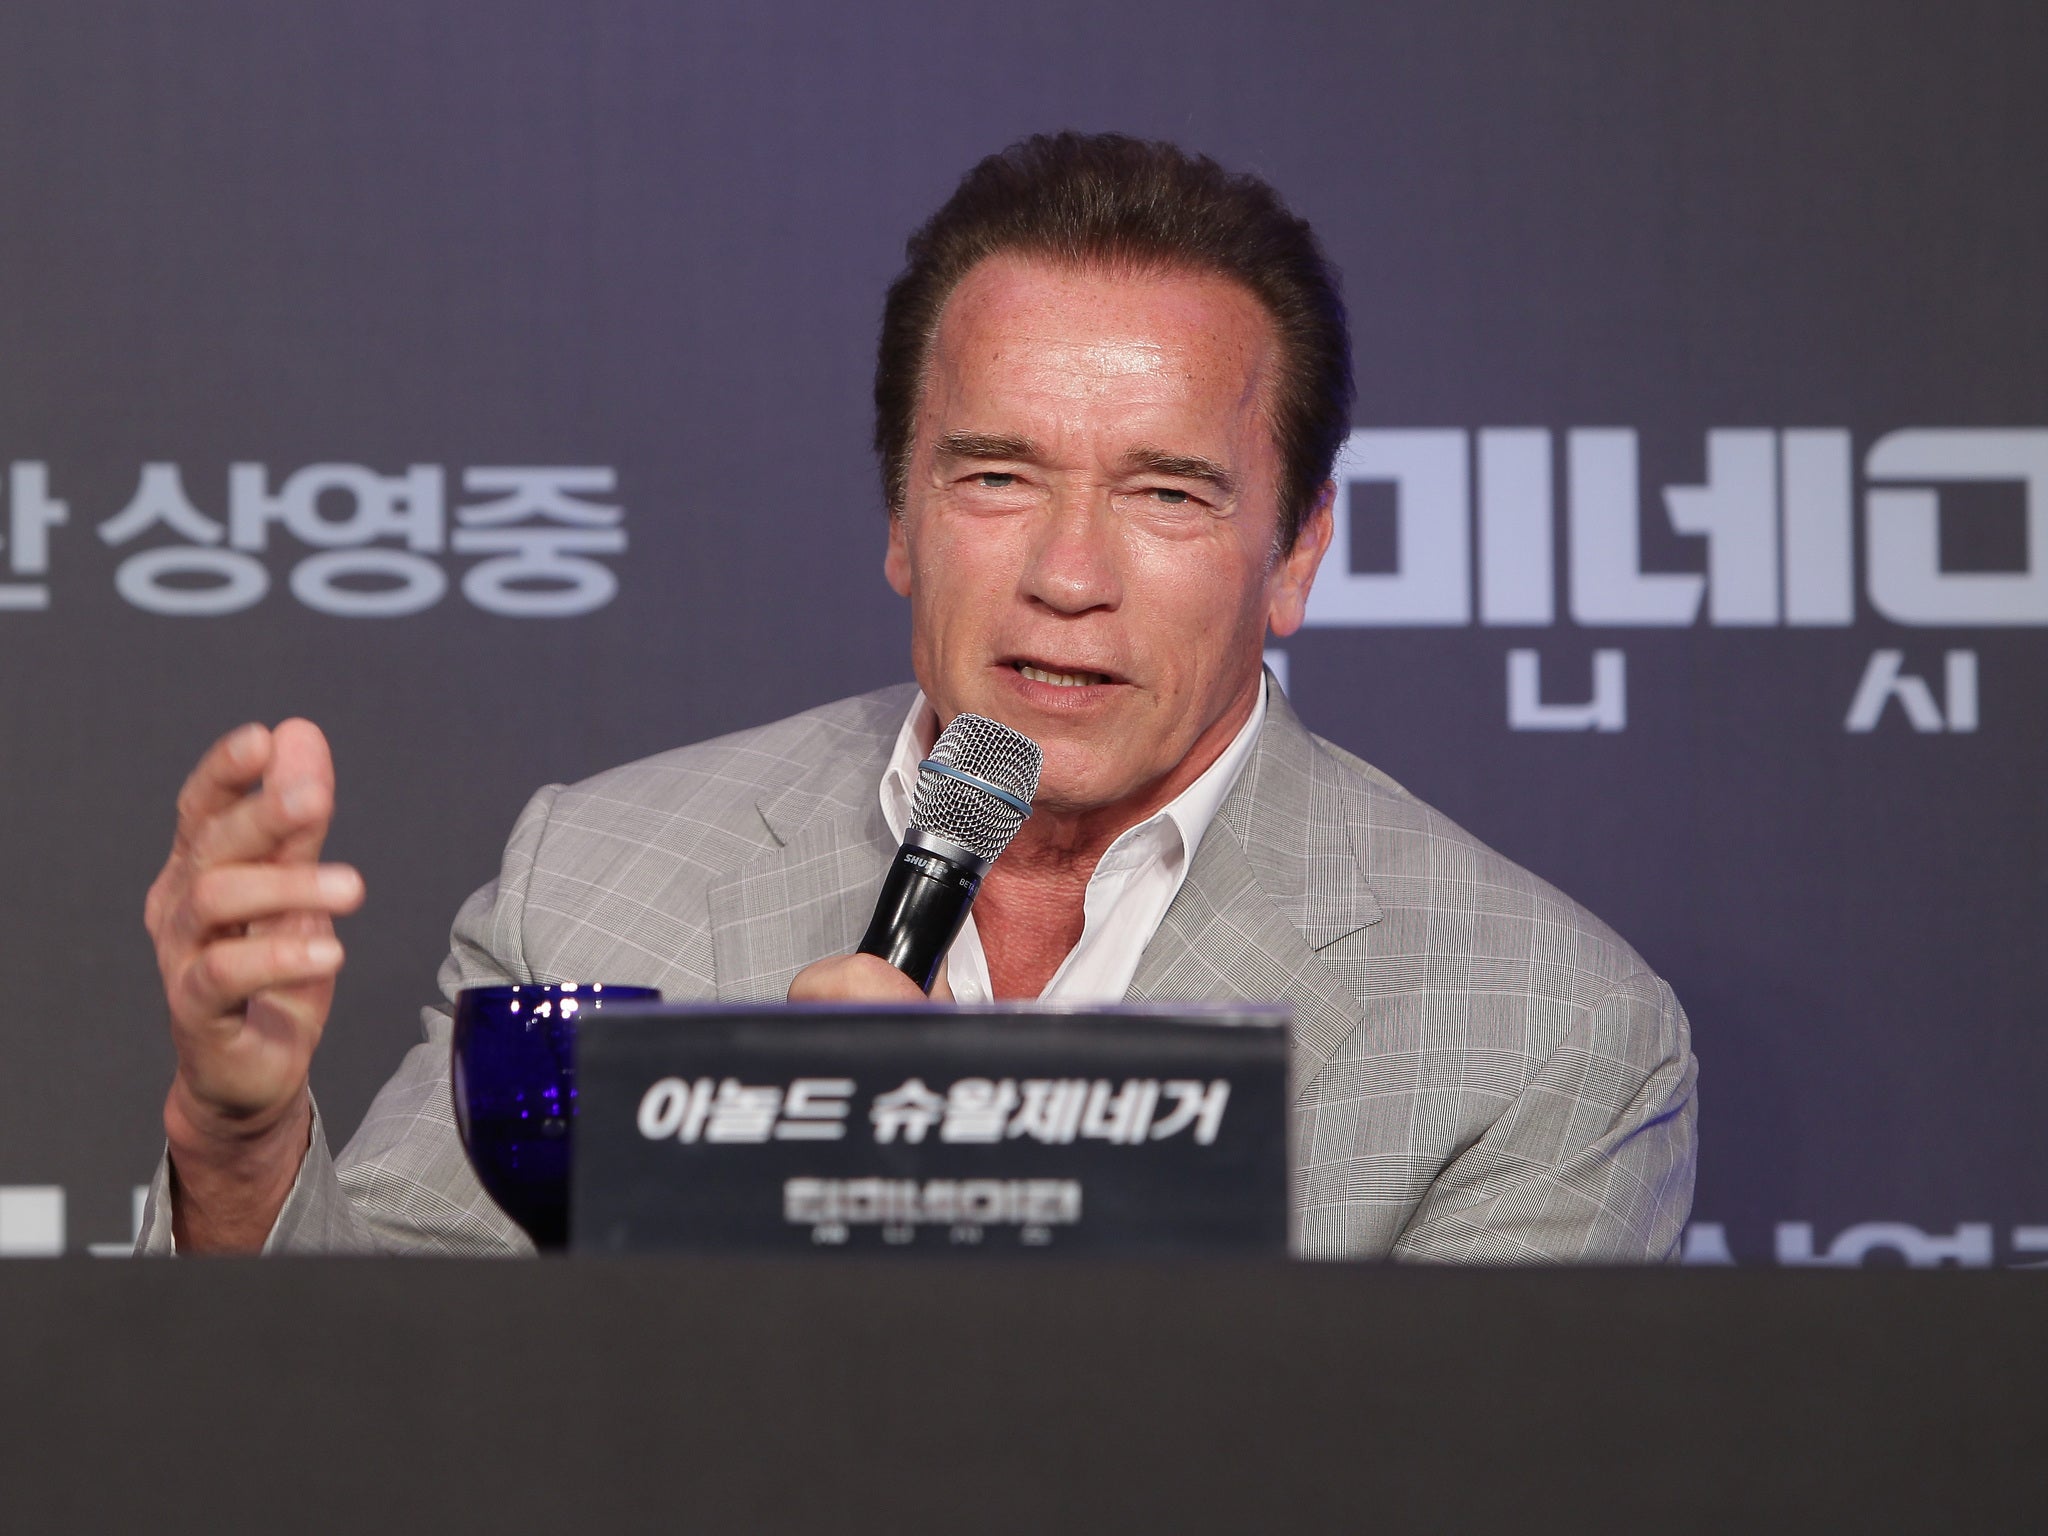 The journalist’s interest was no doubt piqued by the fact Schwarzenegger will be overtaking Trump’s previous role as host on the Celebrity Apprentice